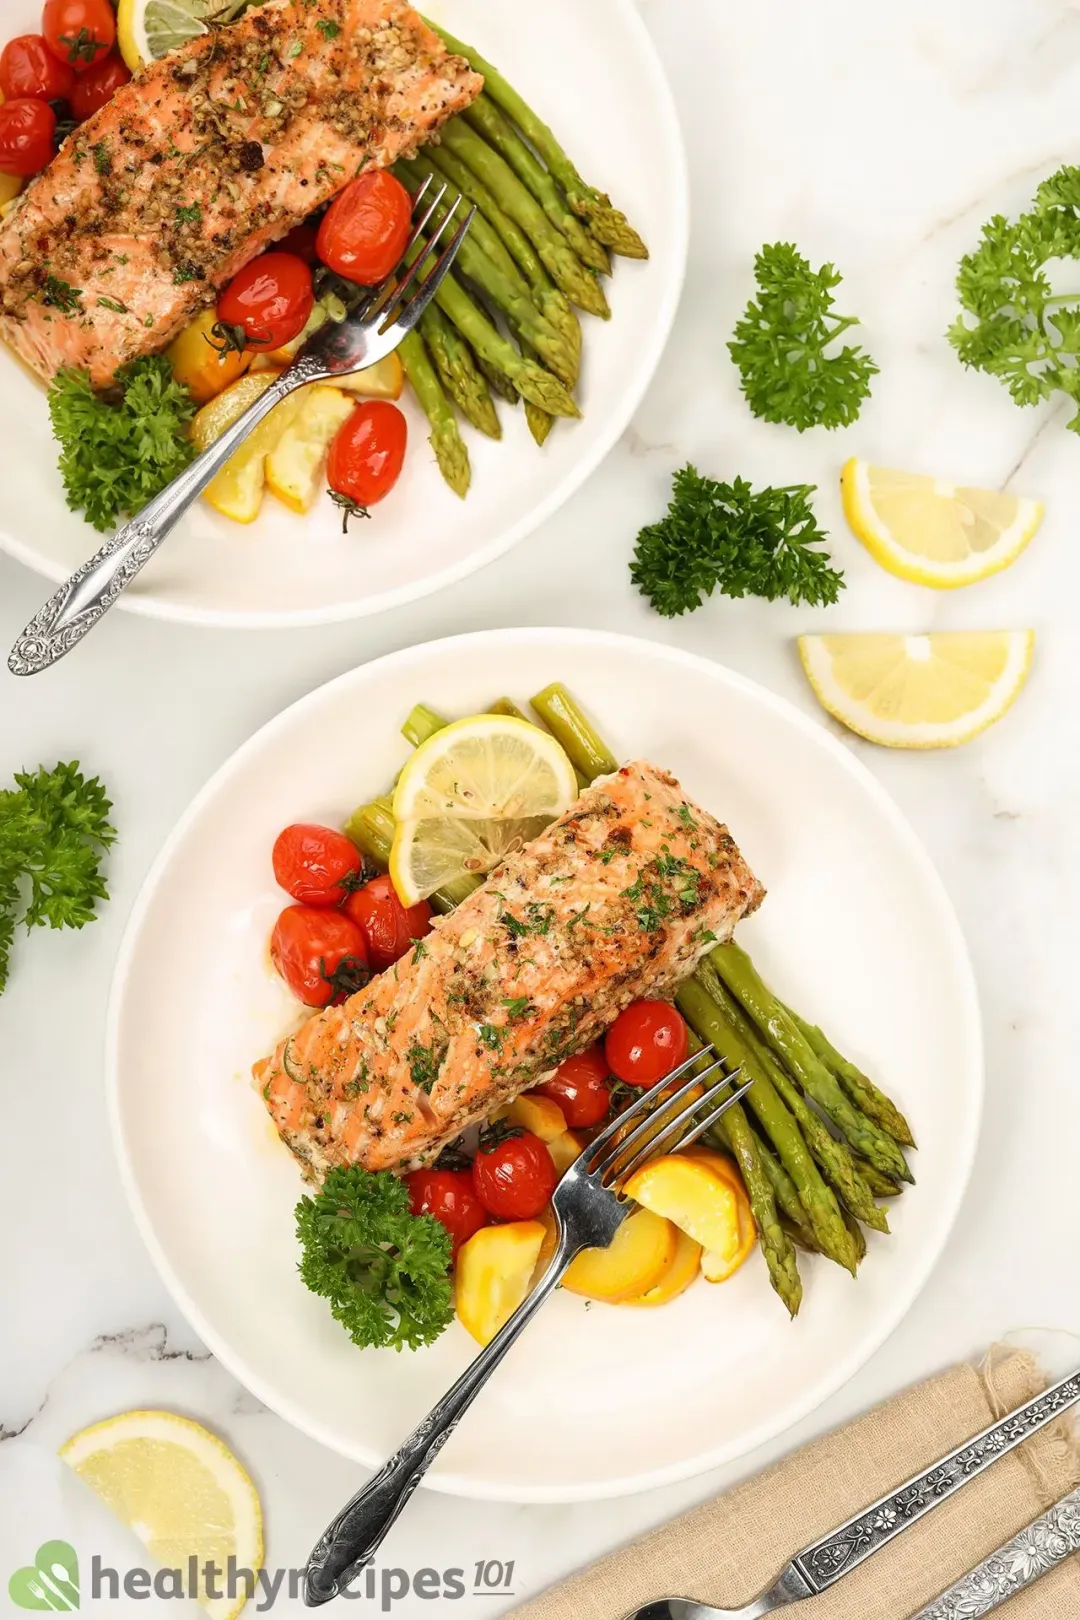 Baked Salmon in Foil Recipe: A Simple and Healthy Dinner Recipe